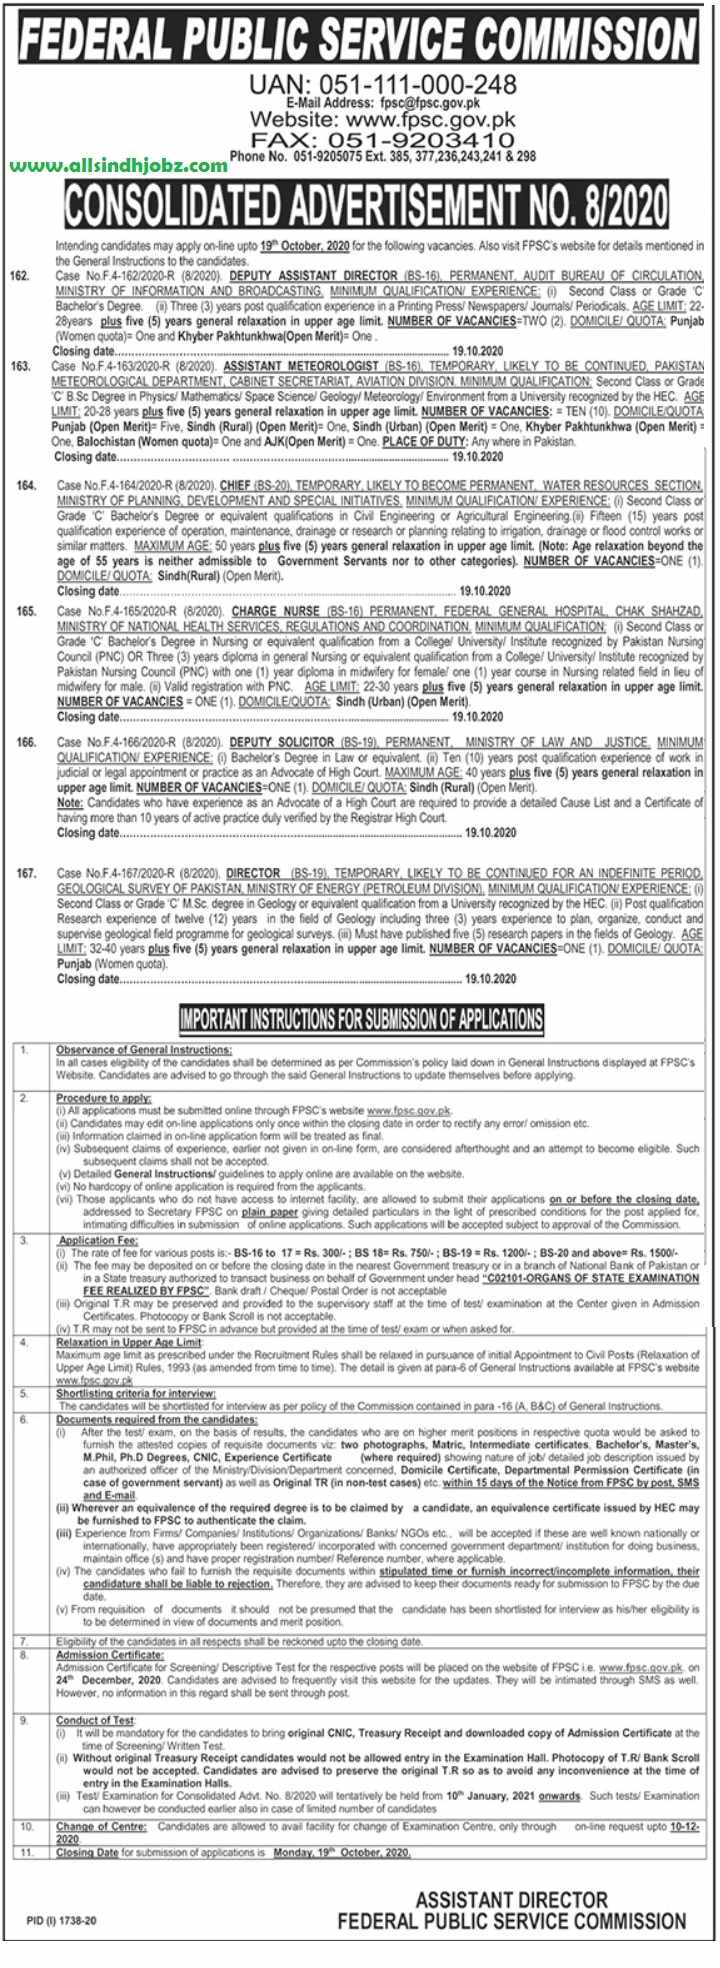 Apply Online for FPSC Jobs 2020 Apply Online Federal Public Service Commission Consolidated advertisement 08/2020